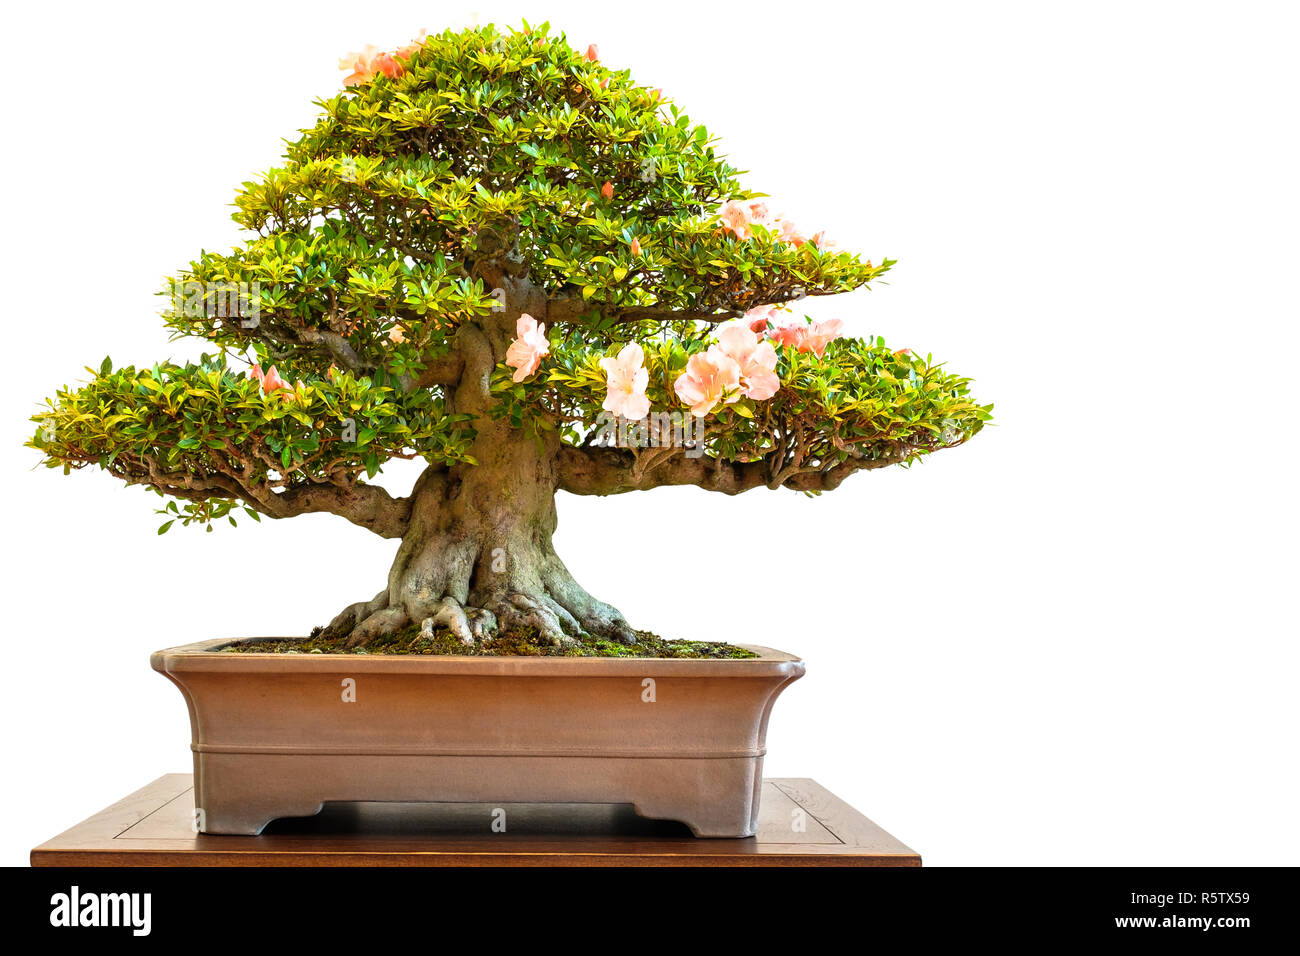 old rhododendron bonsai tree with flowers Stock Photo